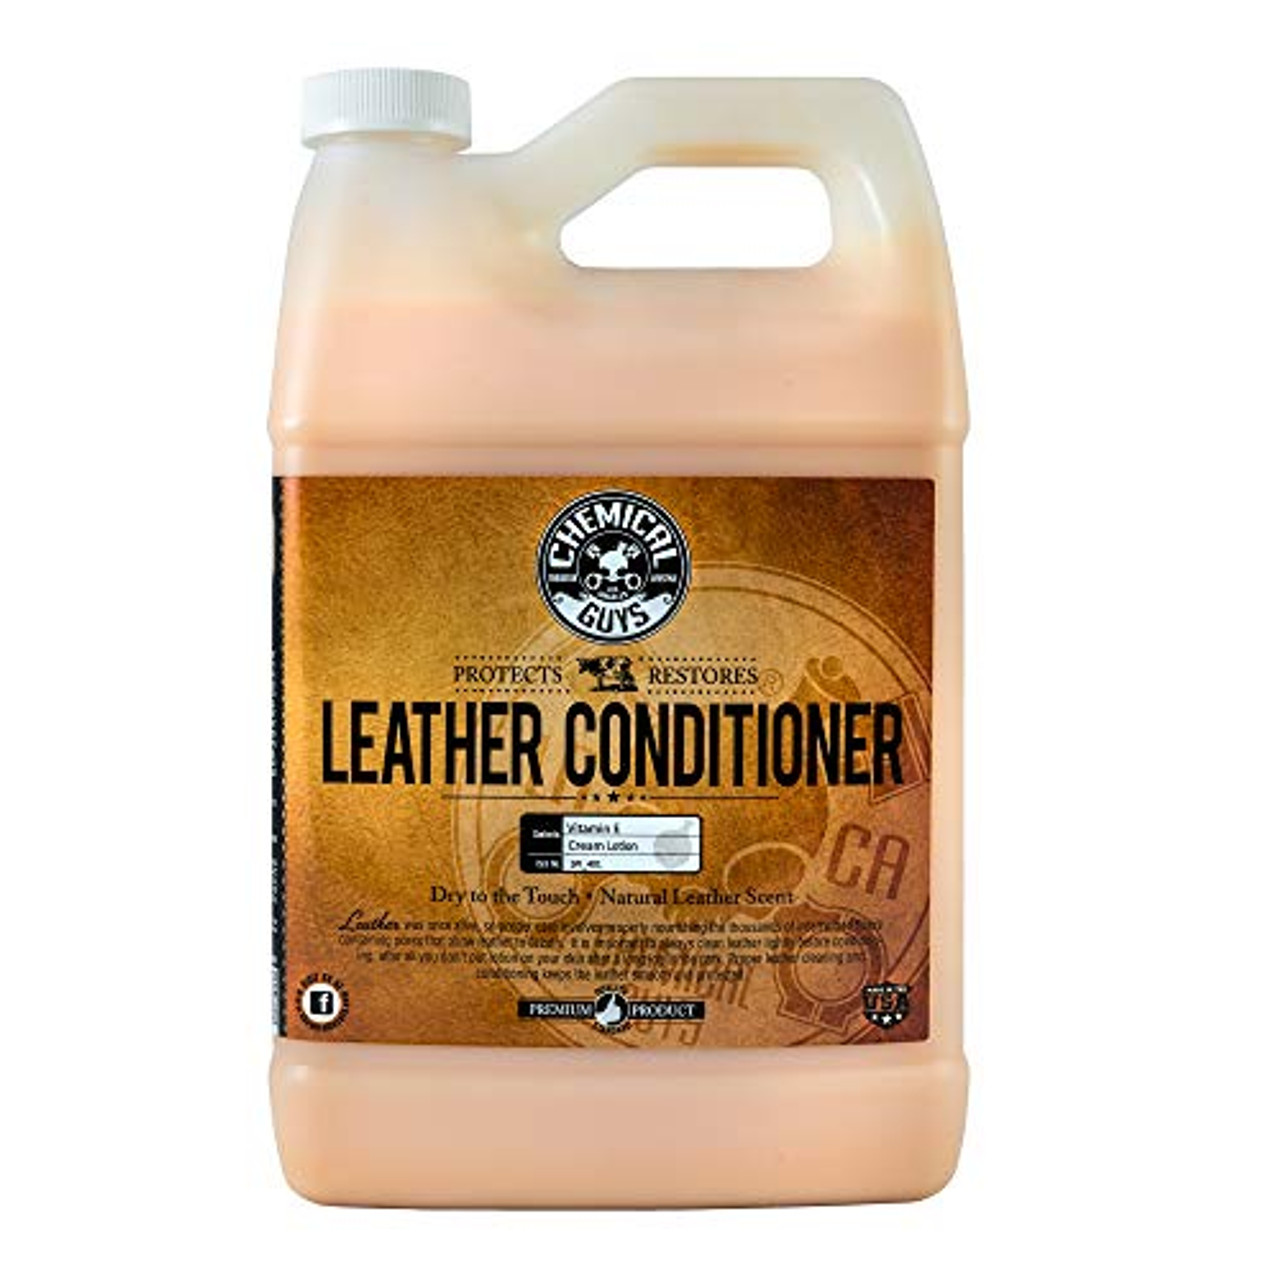  Chemical Guys SPI_103_16 Sprayable Leather Cleaner and  Conditioner in One for Car Interiors, Apparel, and More (Works on Natural,  Synthetic, Pleather, Faux Leather and More) Leather Scent, 16 fl oz 